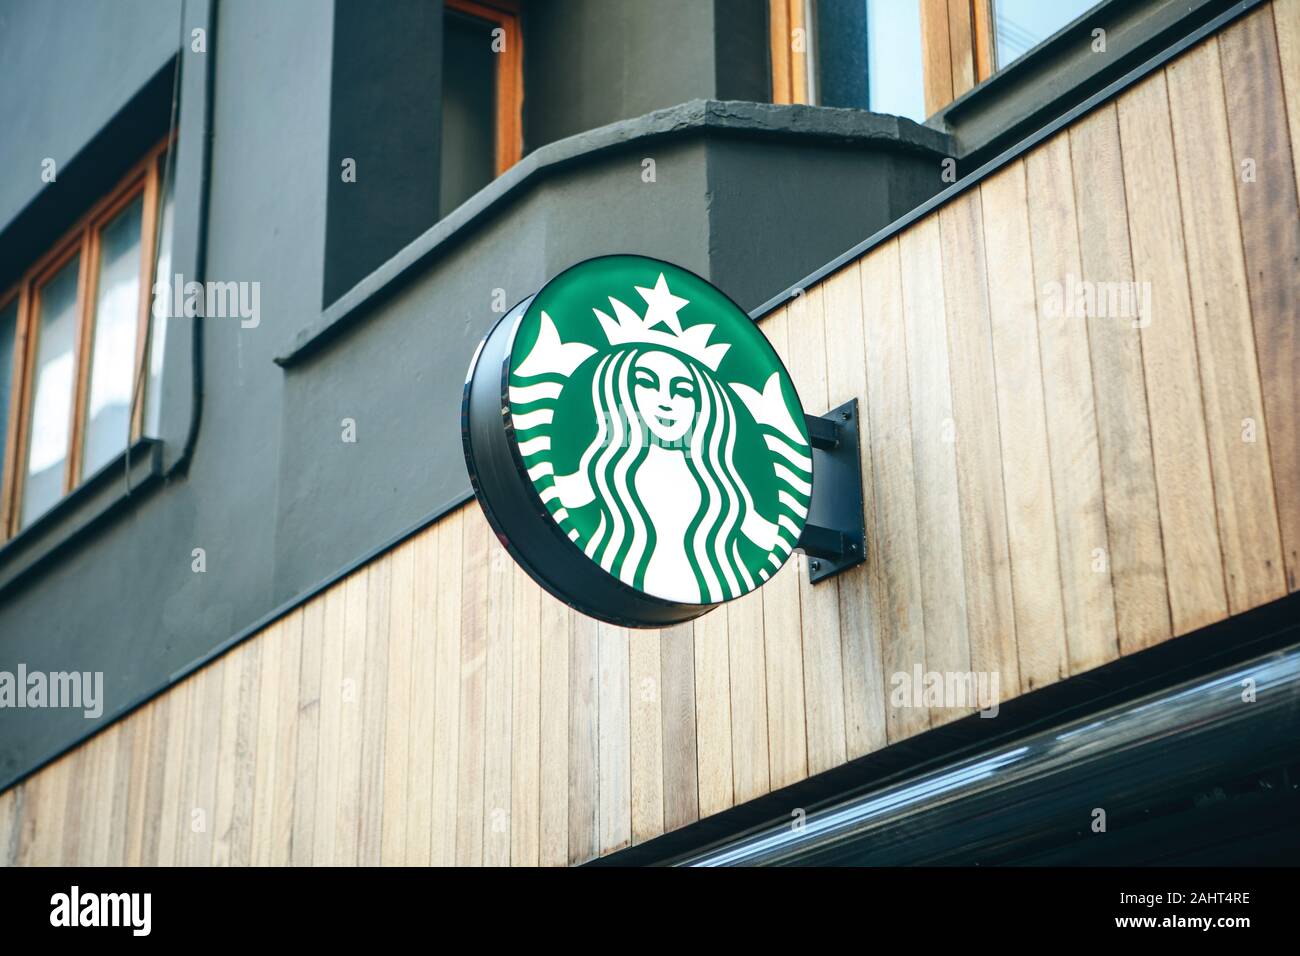 Turkey, Istanbul, December 29, 2019 Starbucks coffee sign at the entrance Stock Photo